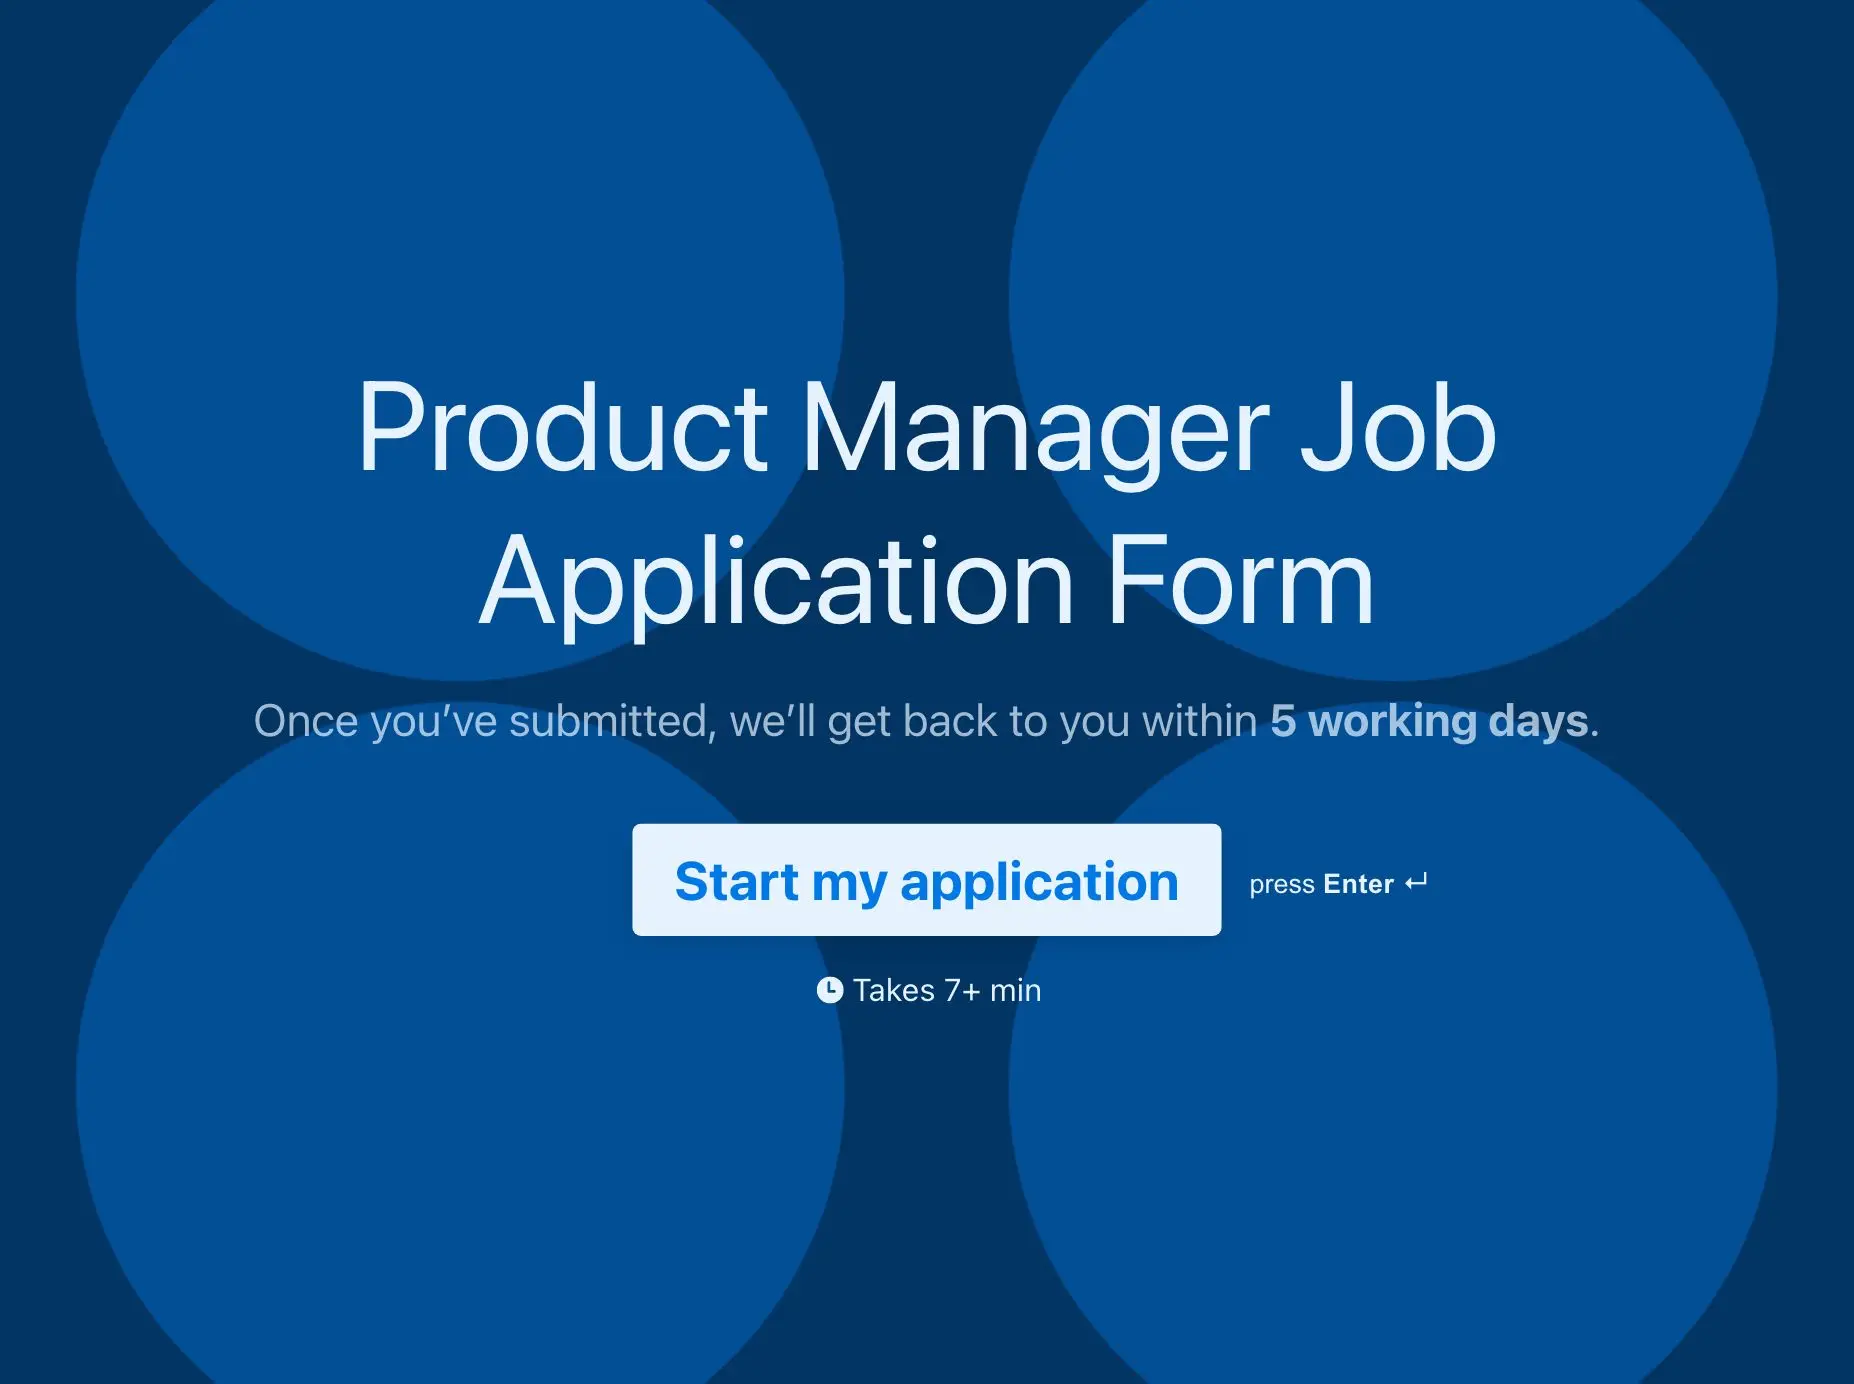 Product Manager Job Application Form Template Hero